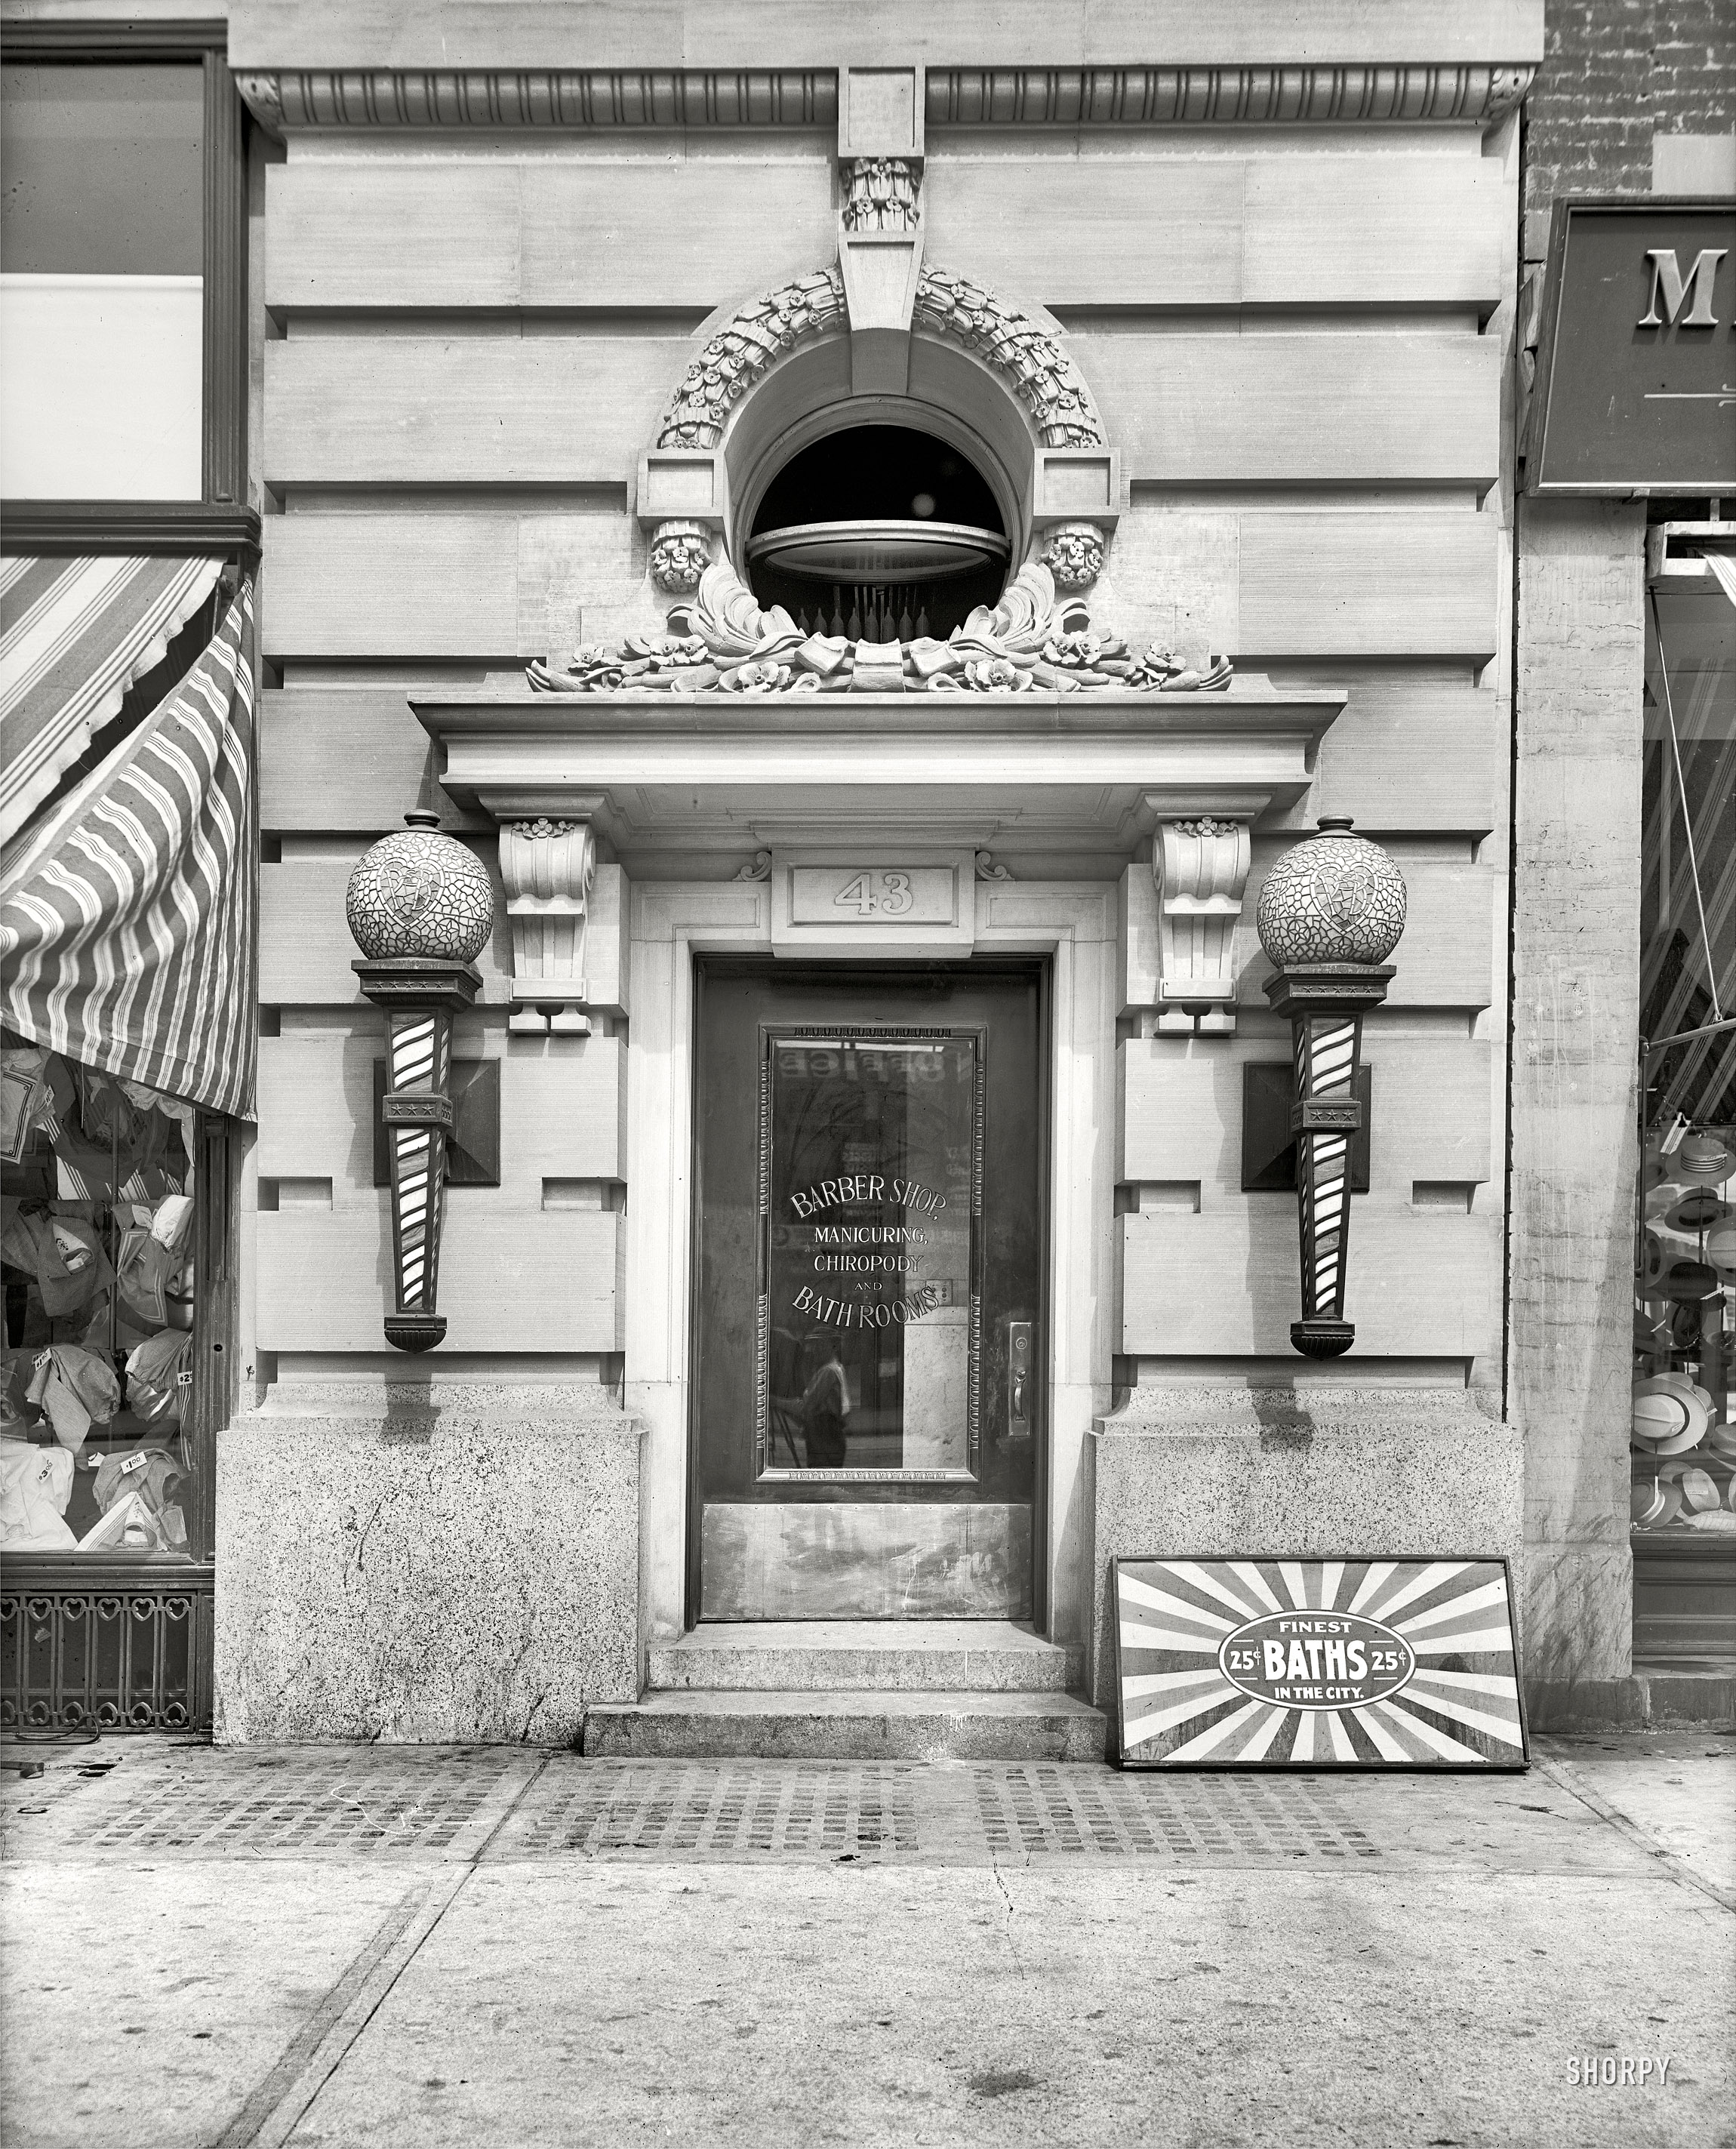 Detroit, Michigan, circa 1915. "Entrance to barber shop, Pardridge & Blackwell building." The usually anonymous Detroit Publishing photographer makes a cameo appearance. 8x10 glass negative, Detroit Publishing Co. View full size.